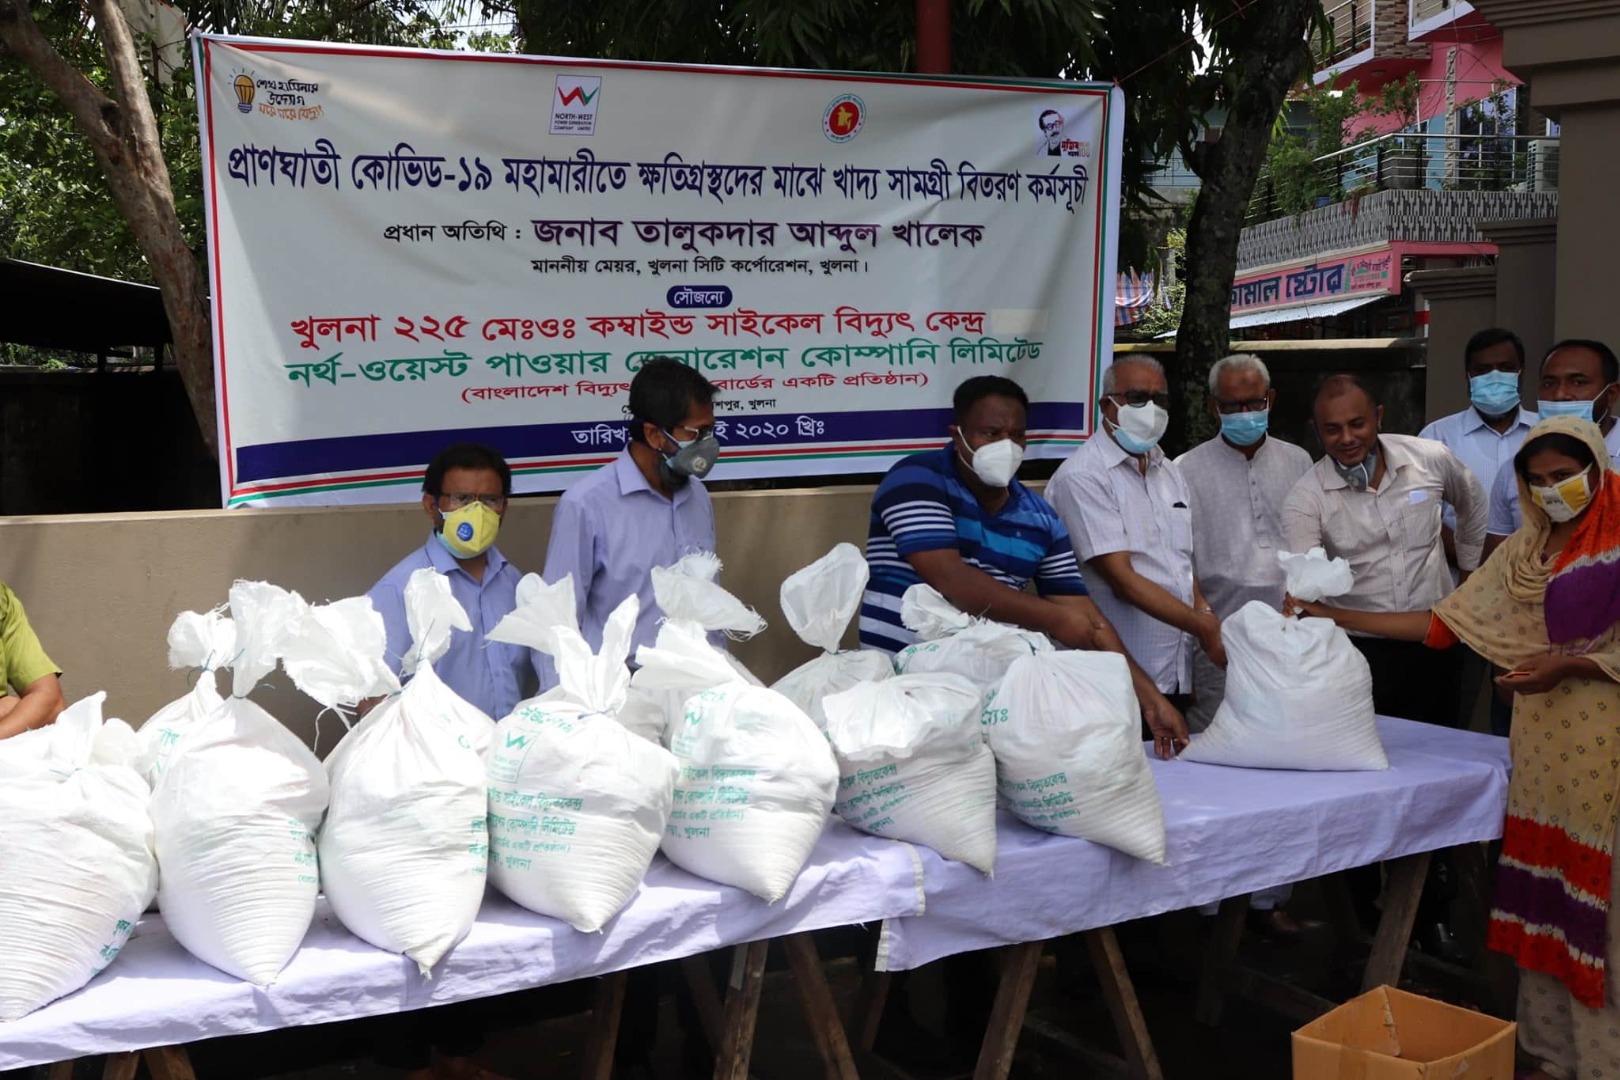 NWPGCL gave food assistance to the affected people around Khulna 225 MW Combined Cycle Power Plant due to Covid-19 Pandemic